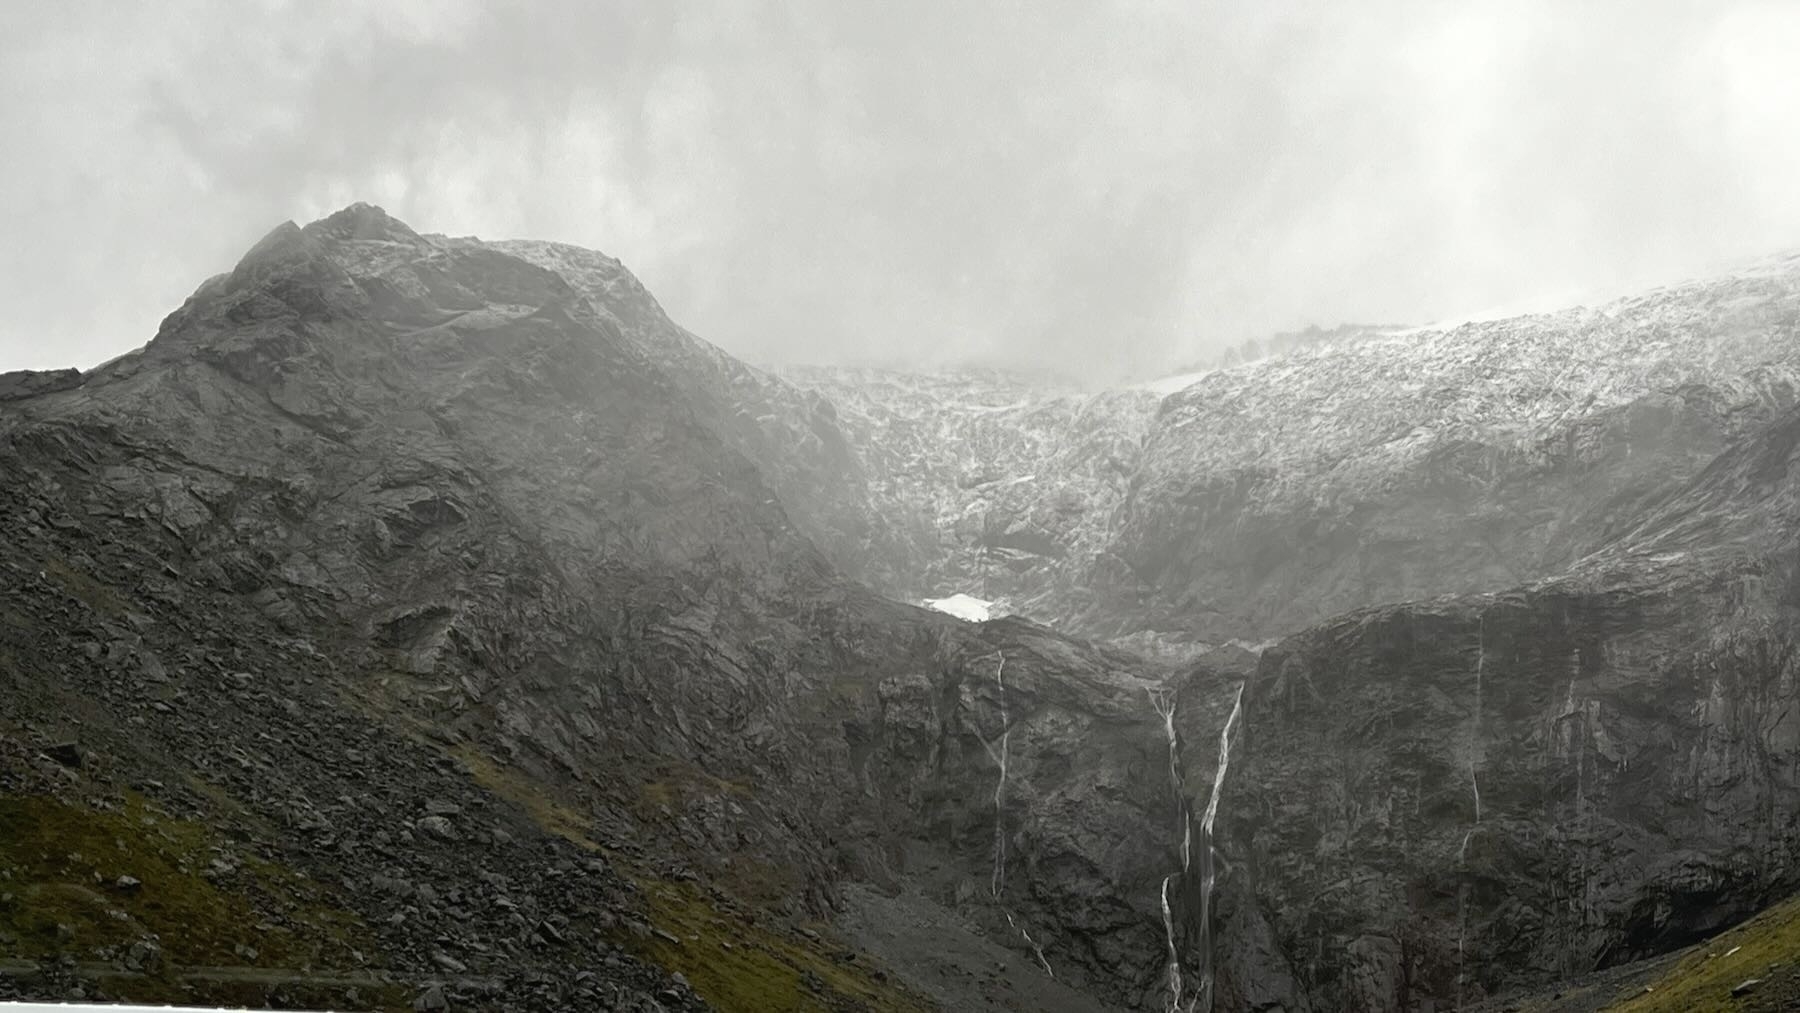 Bare snowy mountain tops with streams. Above, misty rain.